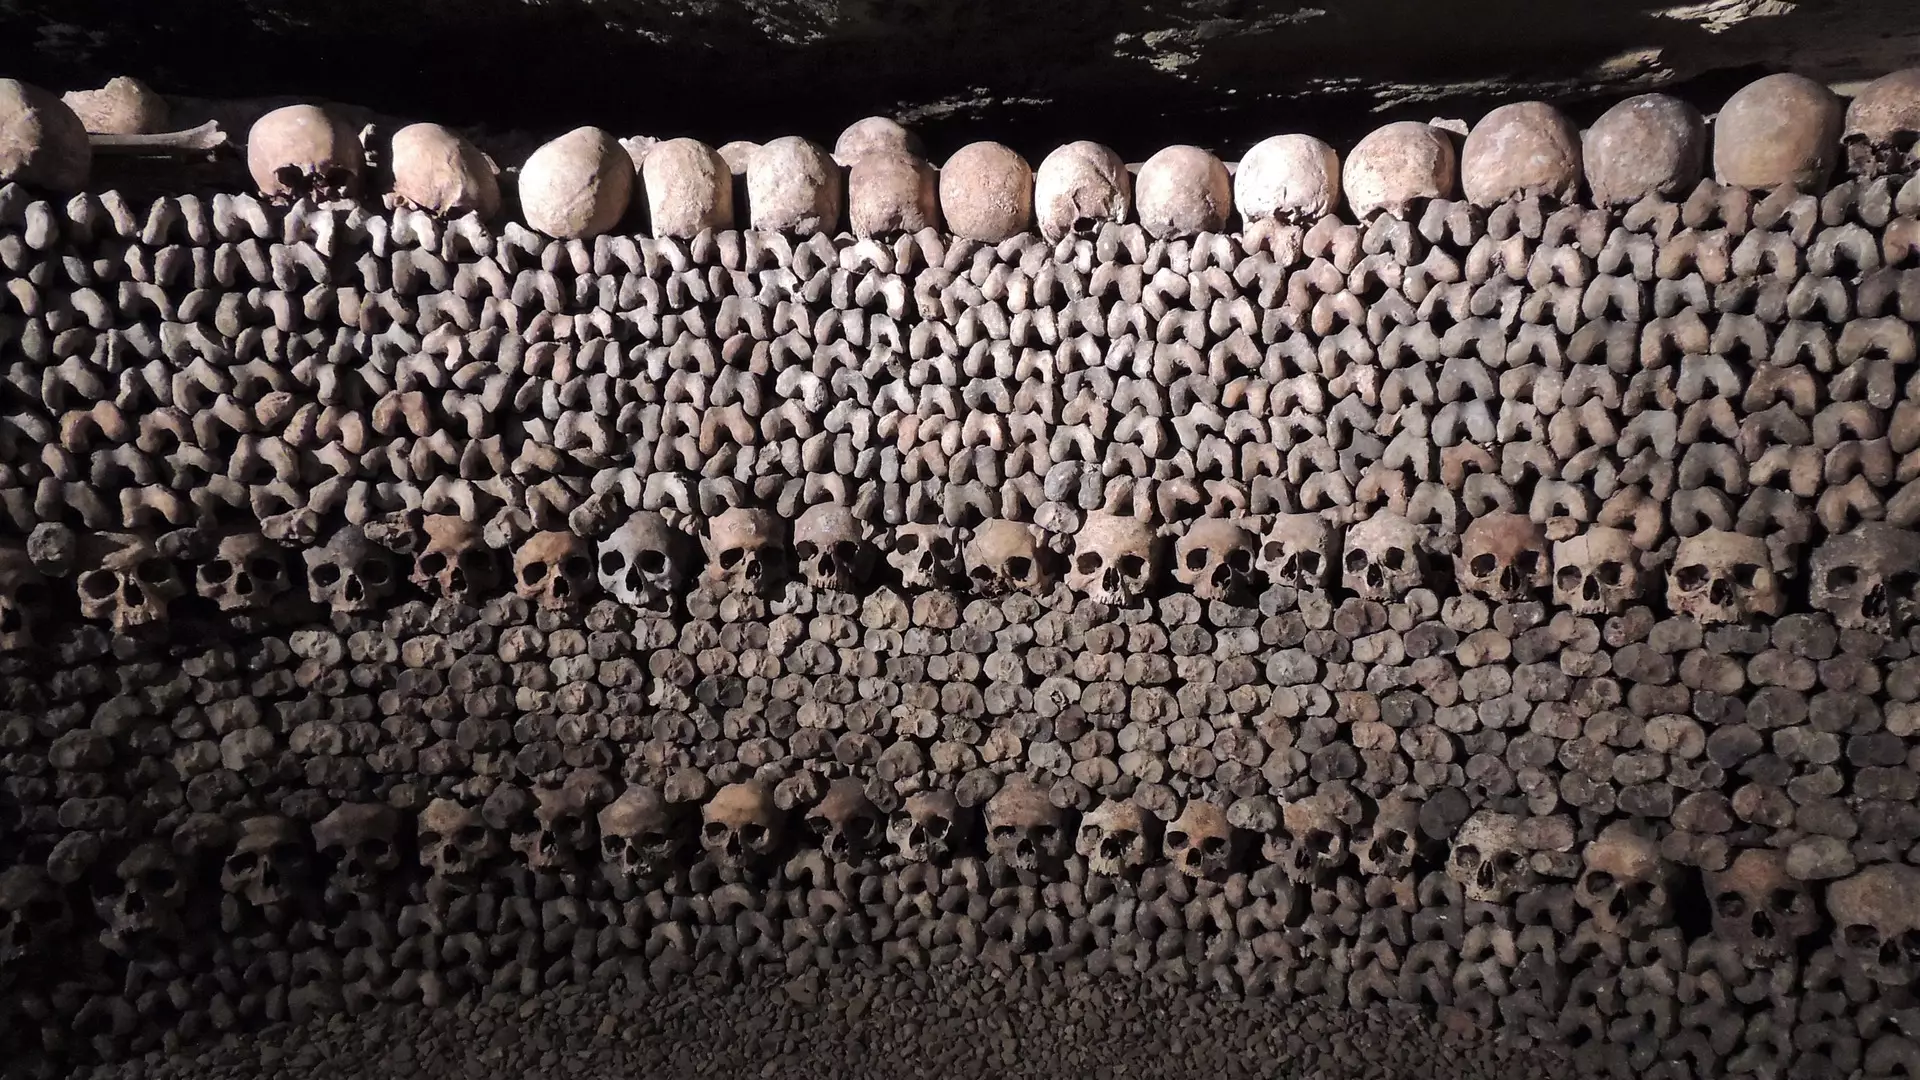 Two Teenagers Found After Becoming Lost In Paris Catacombs For Three Days